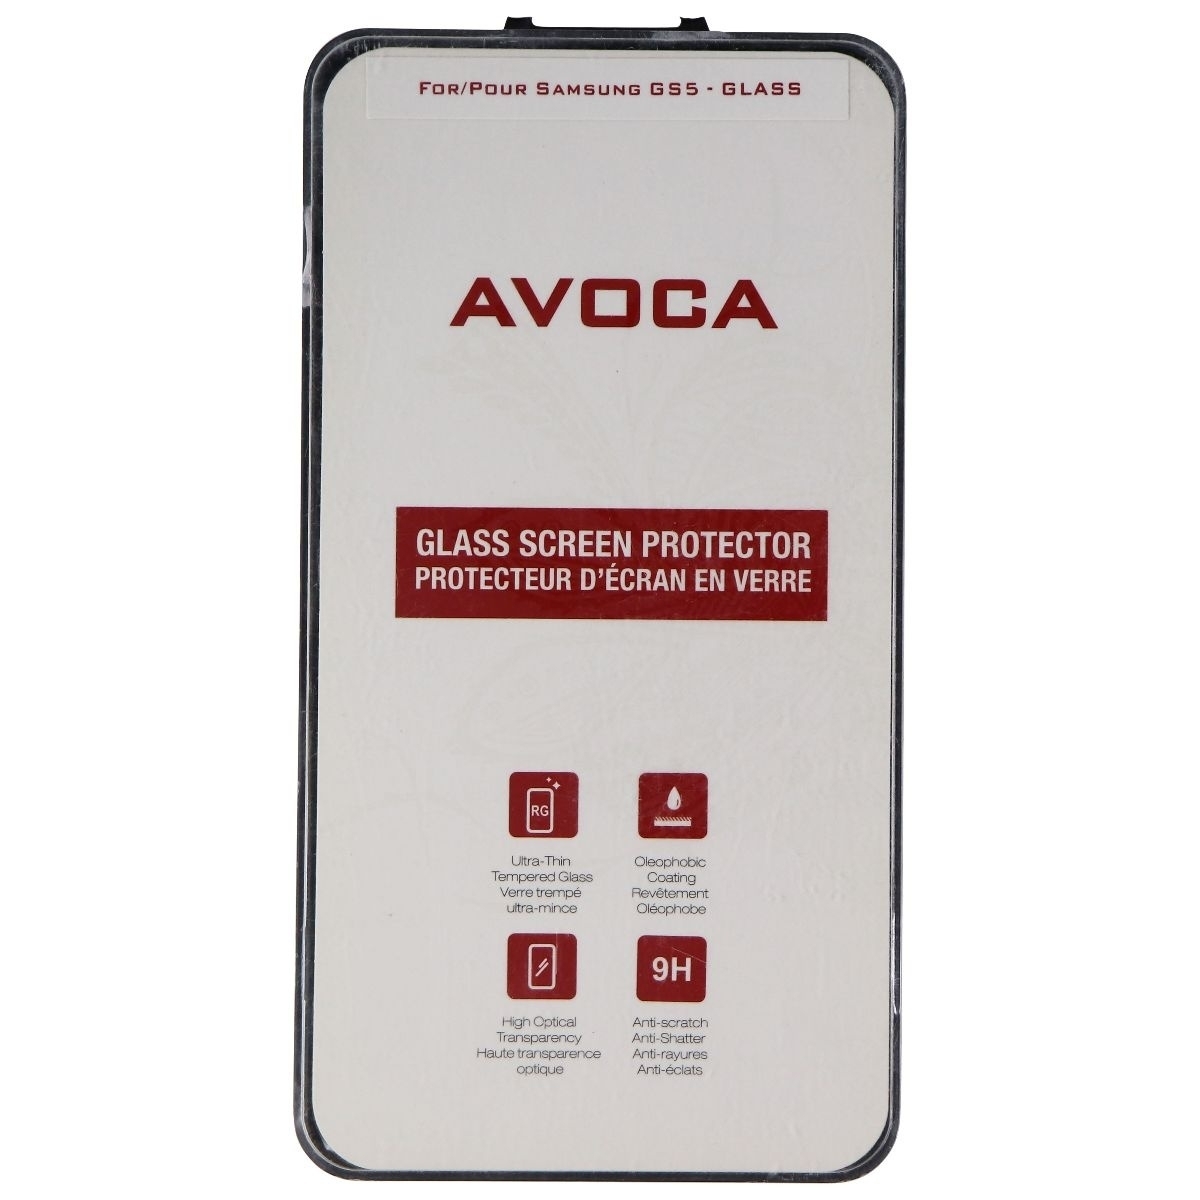 Avoca Glass Screen Protector For Samsung Galaxy S5 Smartphone - Clear